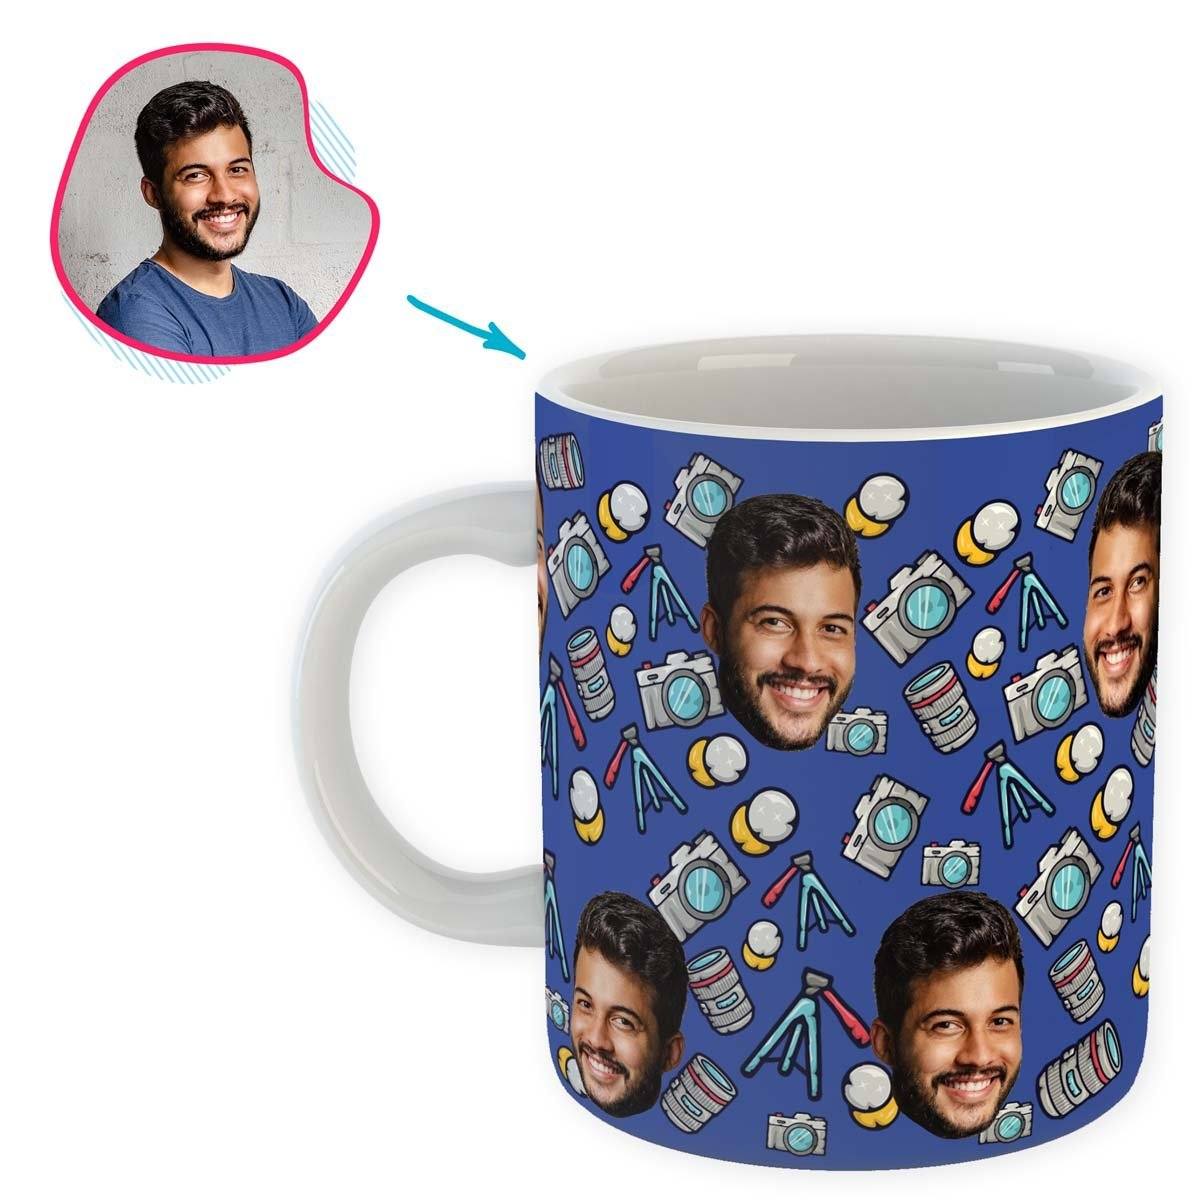 darkblue Photography mug personalized with photo of face printed on it